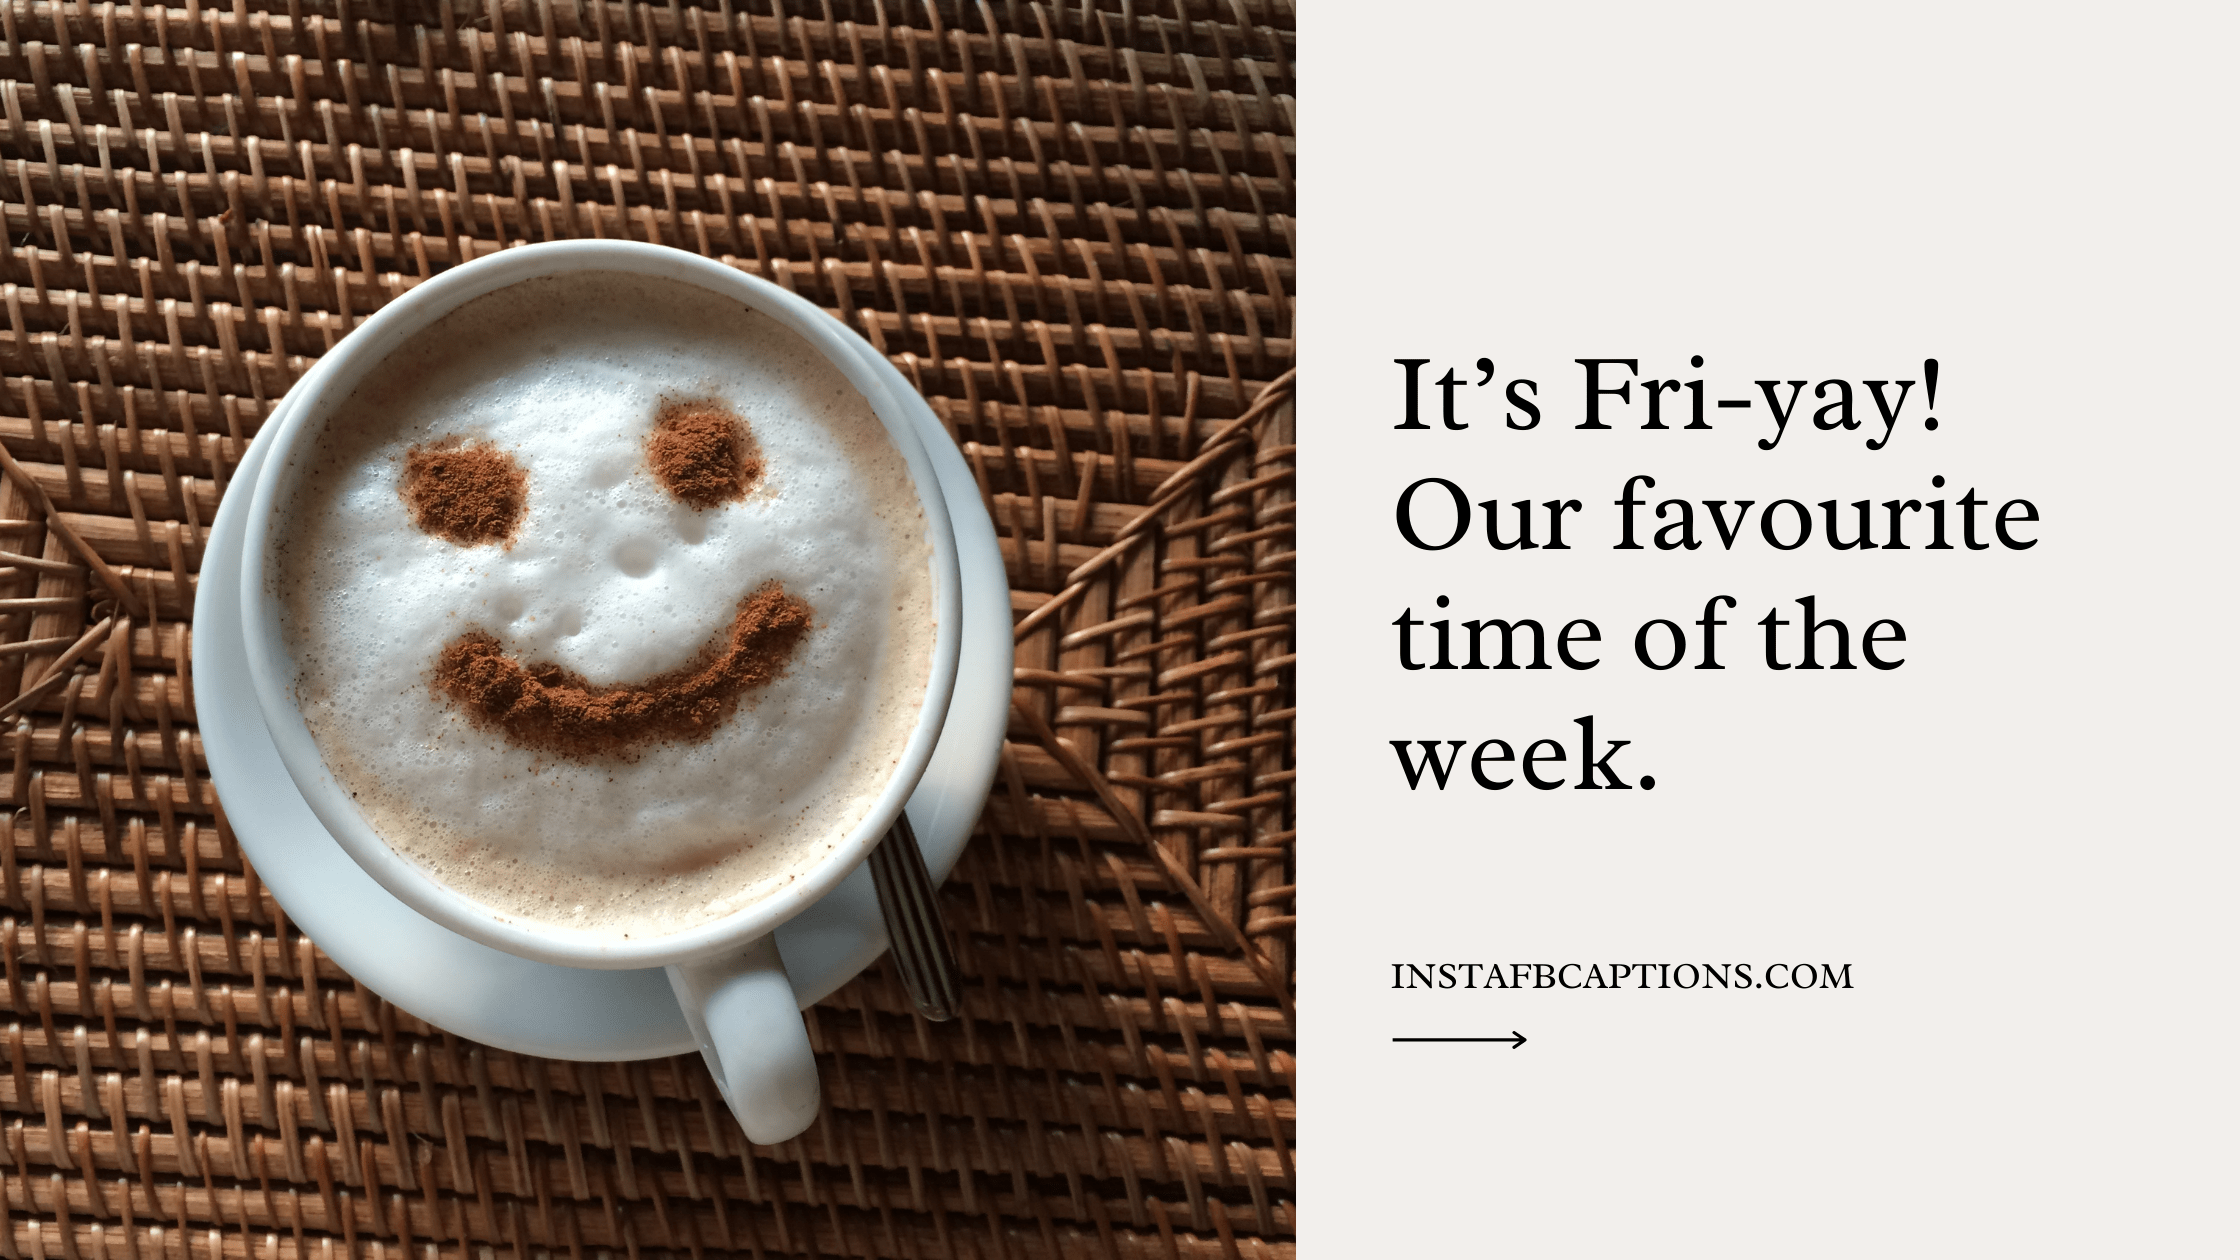 A beautiful caption is written - "It’s Fri-yay! Our favourite time of the week."  - Love Friday Captions for Instagram - 130+ Perfect Friday Captions for Instagram in 2023